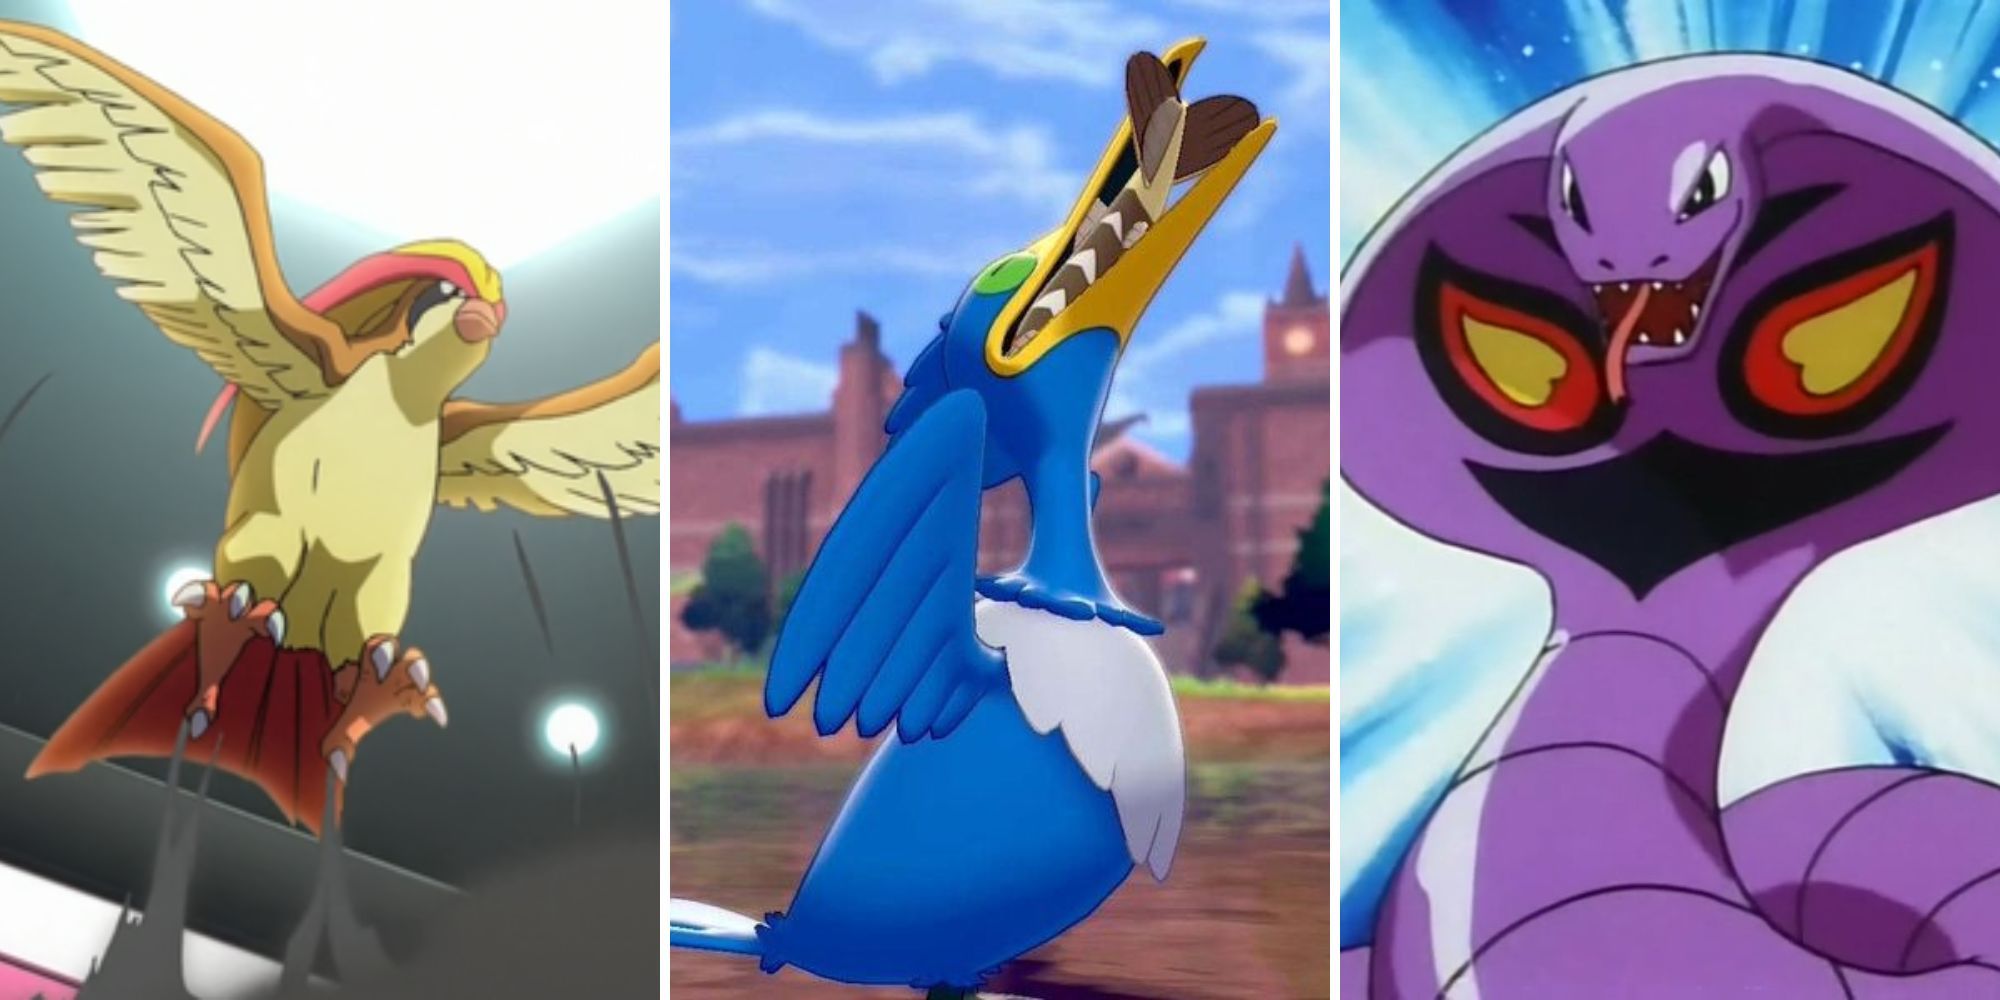 Pidgeot flies in the air, Cramorant battles with an Arrokuda in it's mouth, Arbok prepares to battle